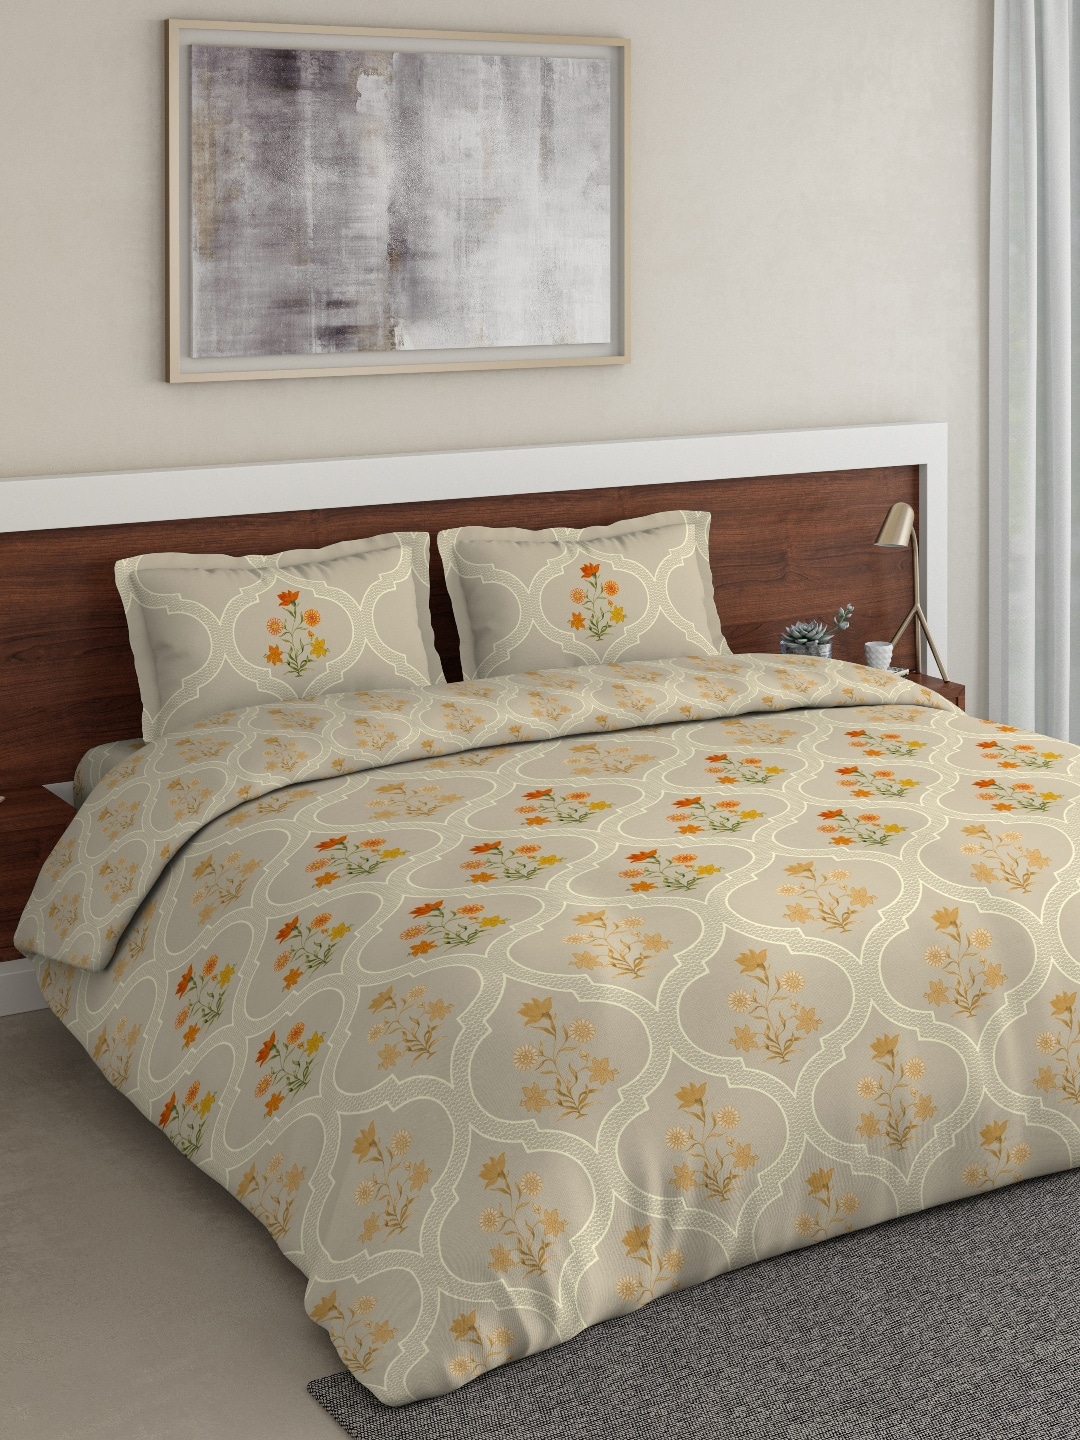 DDecor Beige & Orange Floral Printed Double Queen Bedding Set Price in India